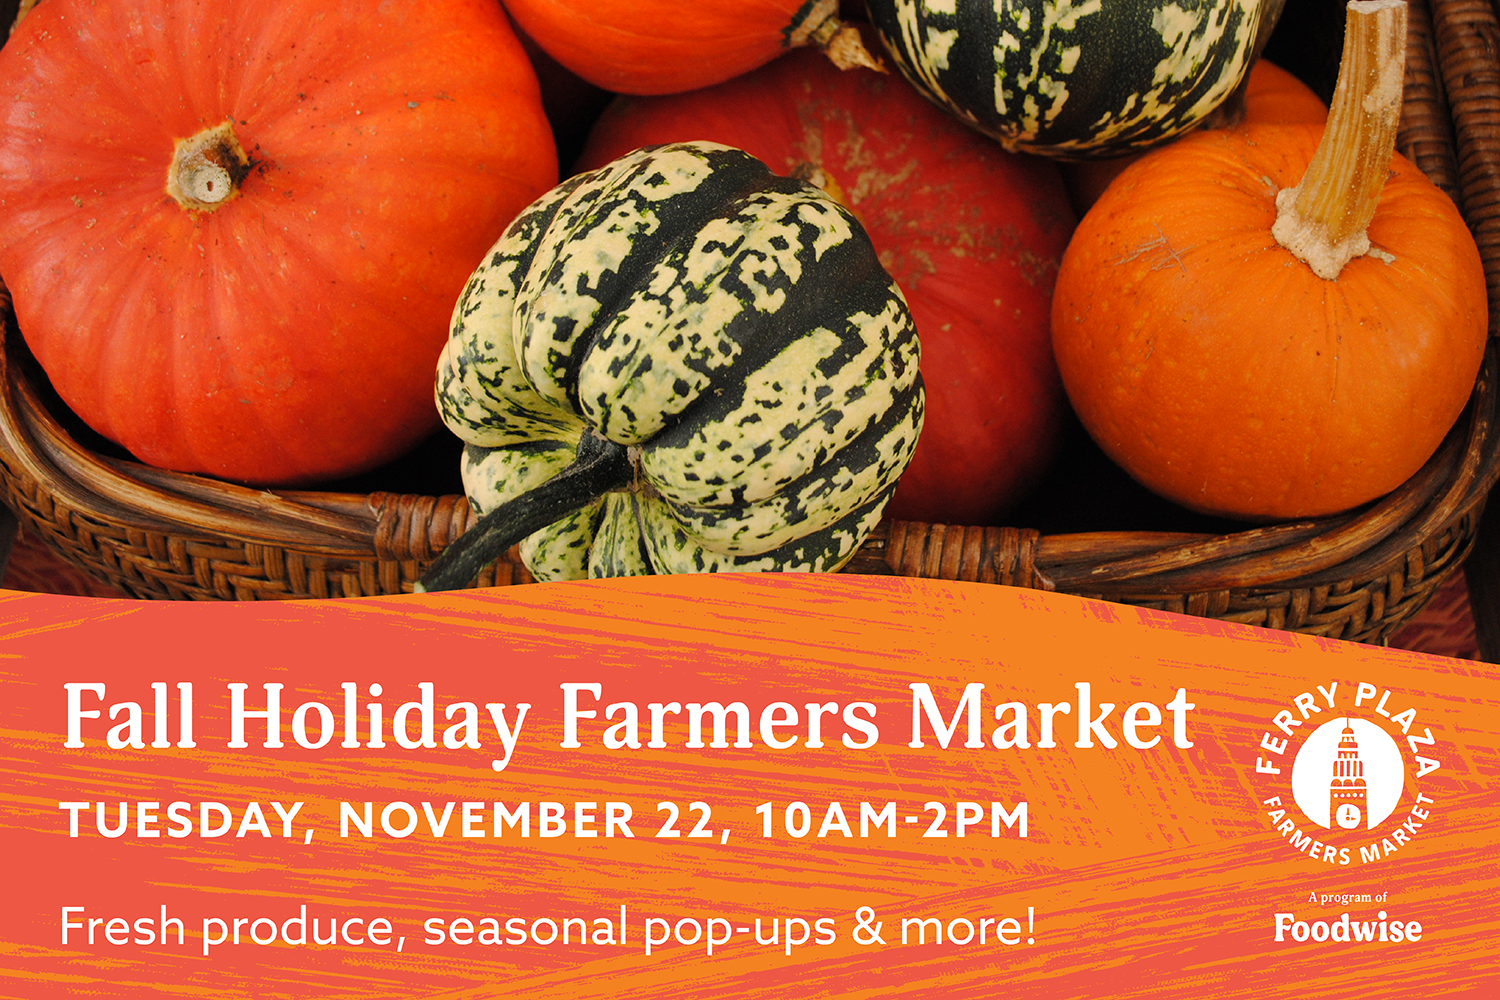 Foodwise Fall Holiday Farmers Market graphic with winter squash